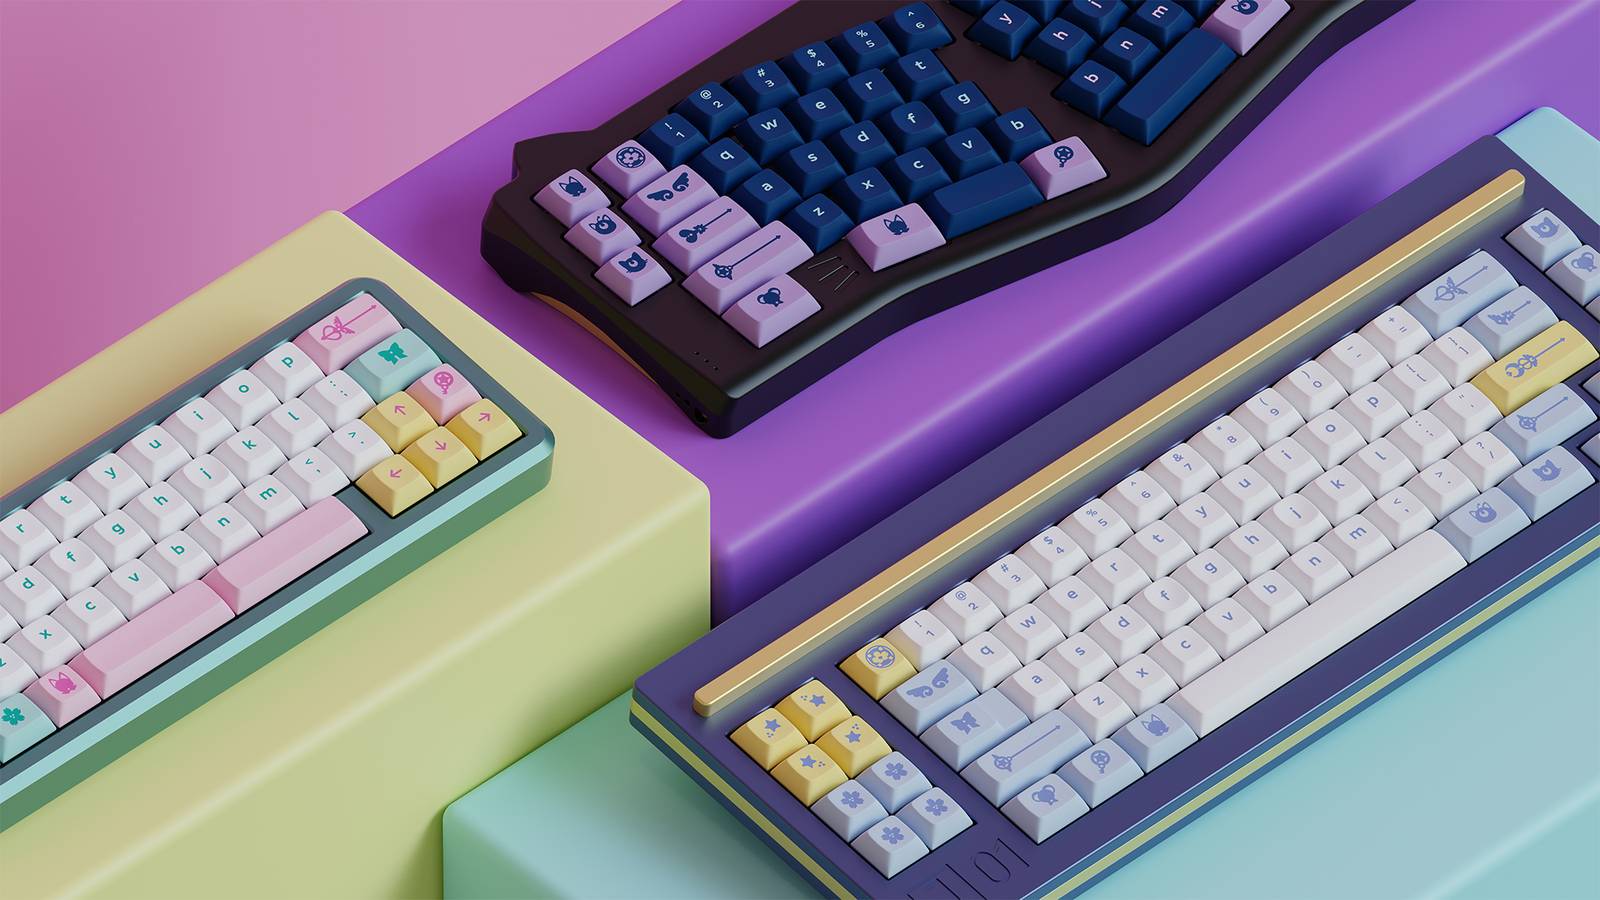 DSA Magic Girl keycaps by Mintlodica in three (3) generations of colors: Classic pink mint yellow, Dark purple navy, and Millennium blue yellow on various Mechanical Keyboards. Presented on colorful blocks befitting the cute shoujo manga anime aesthetic.

